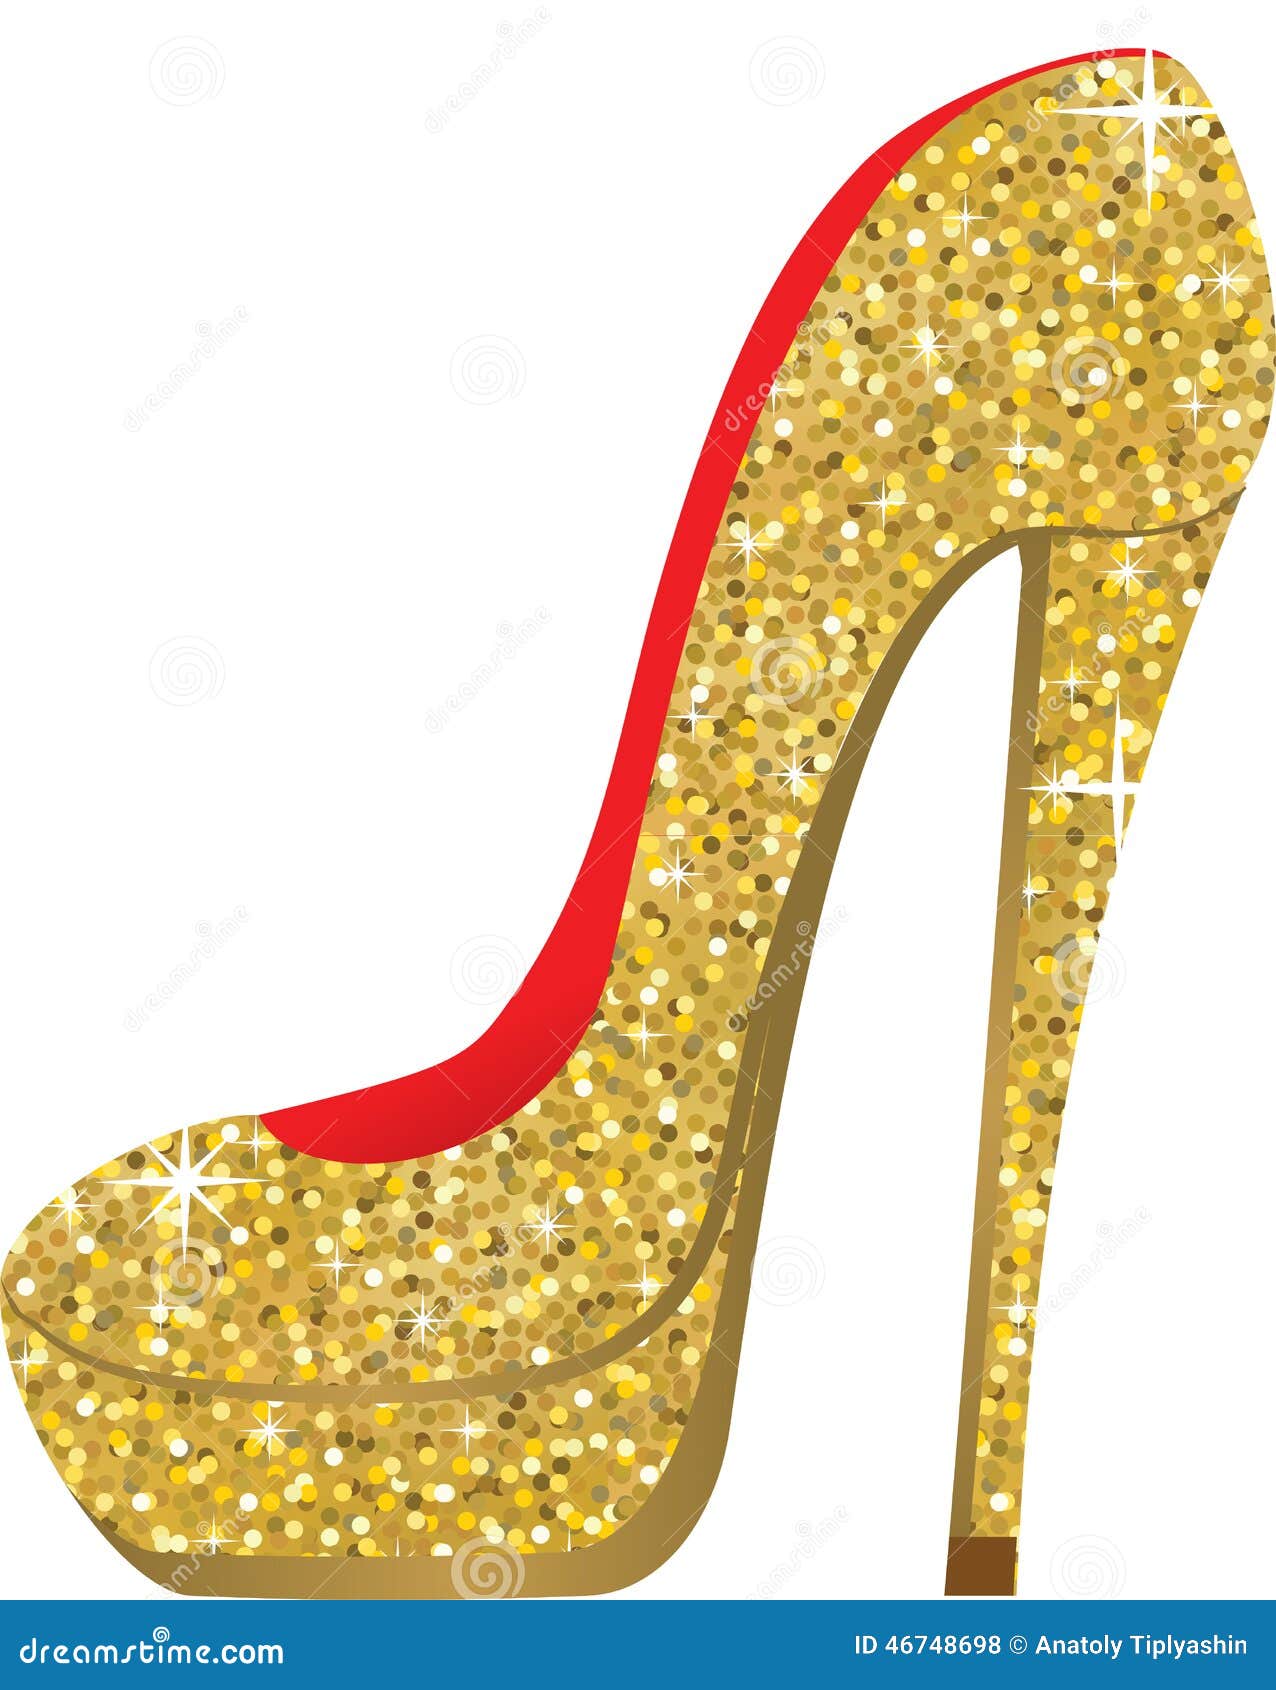 Fashion shoes with sequins stock vector. Illustration of fashion - 46748698